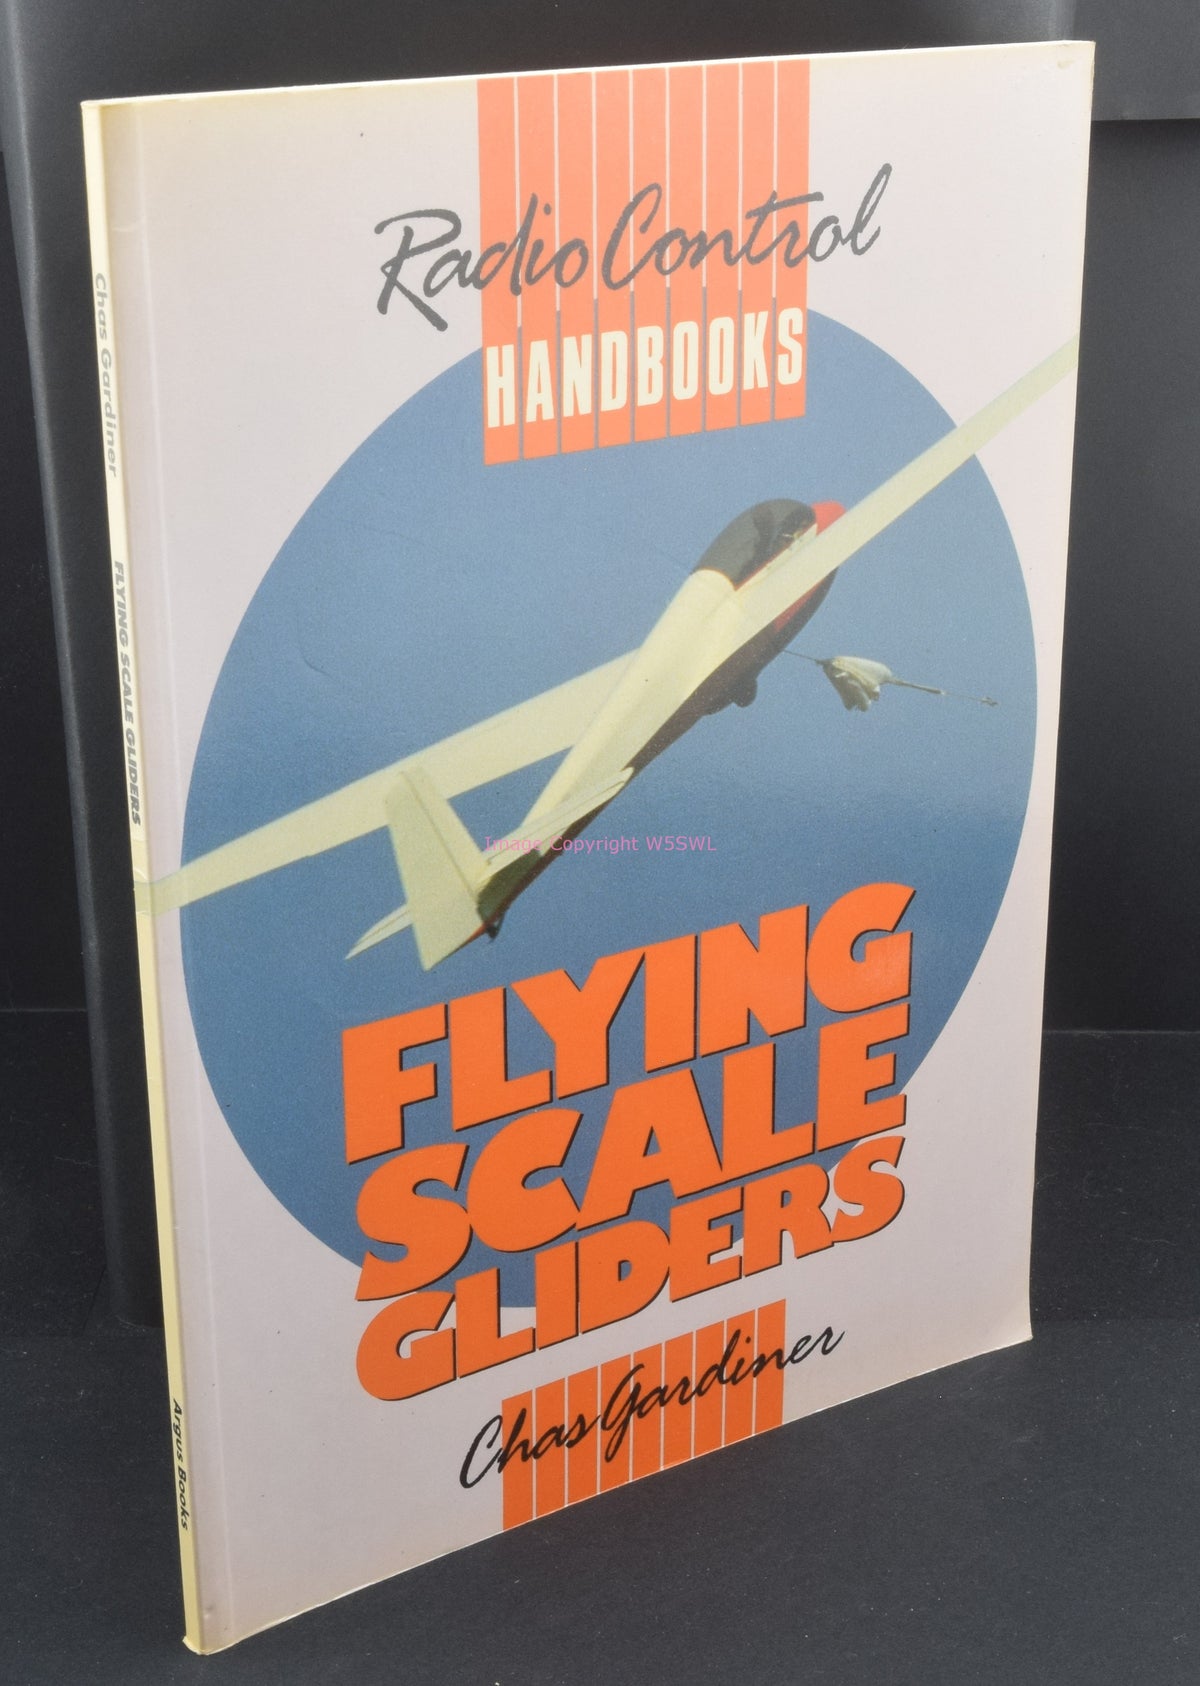 Radio Controlled Handbooks Flying Scale Gliders - Dave's Hobby Shop by W5SWL